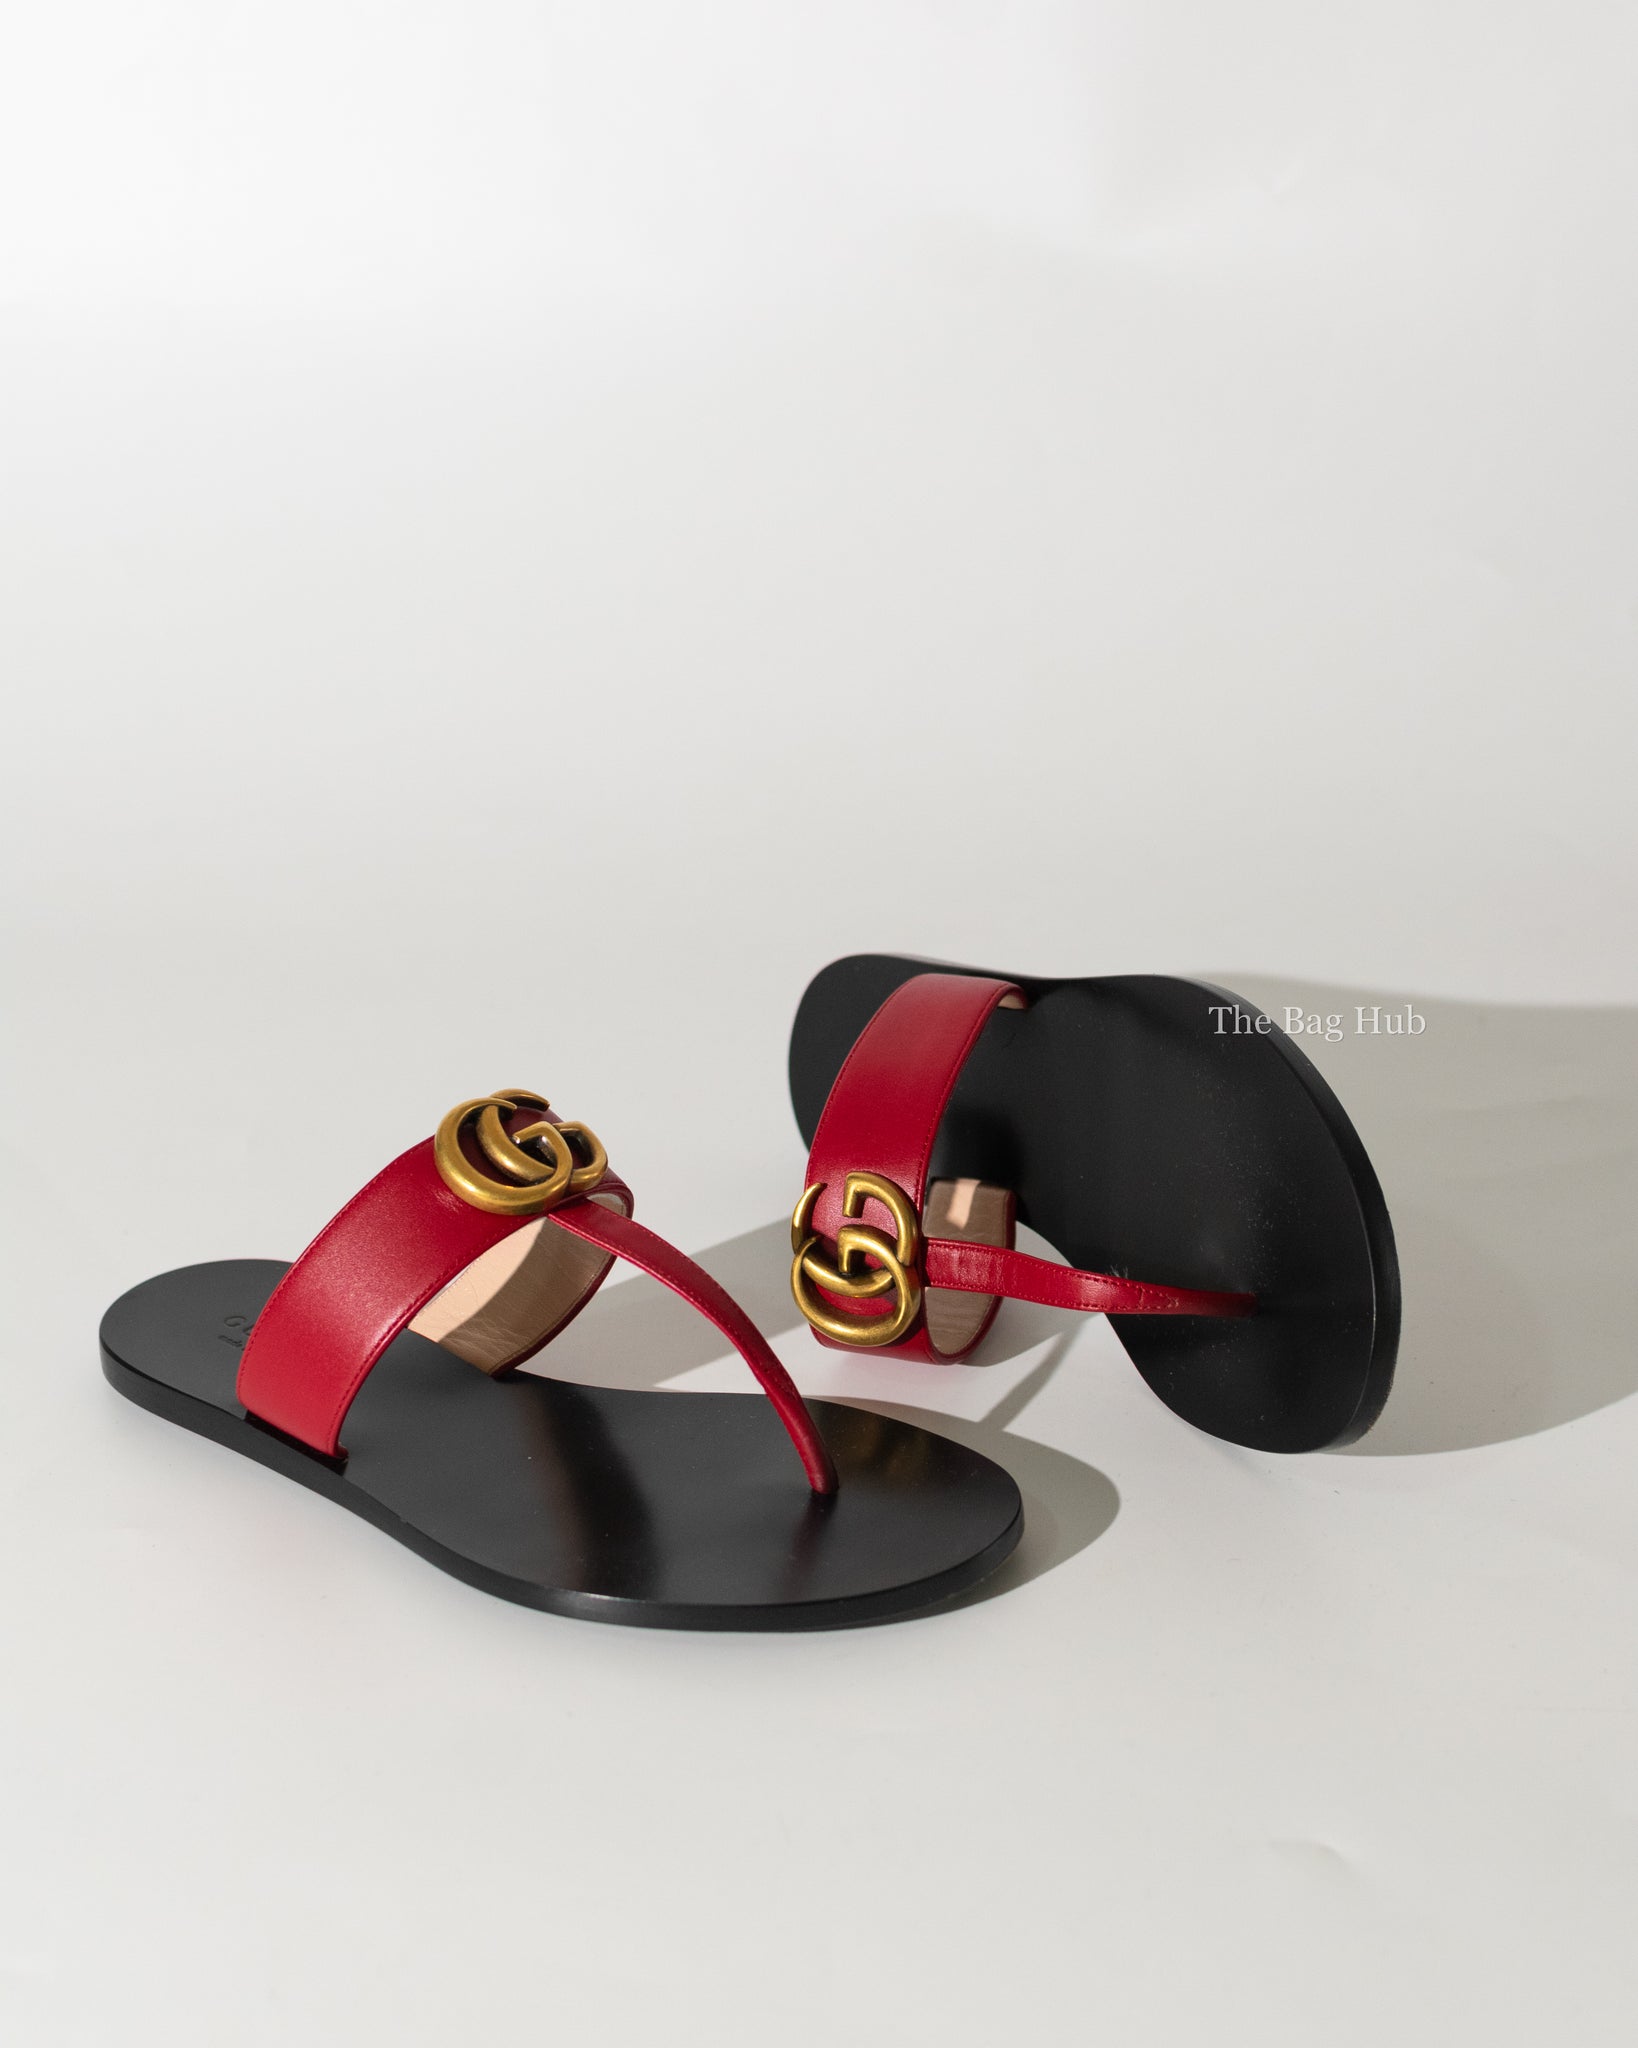 Gucci Double G Leather Thong Sandals - Farfetch